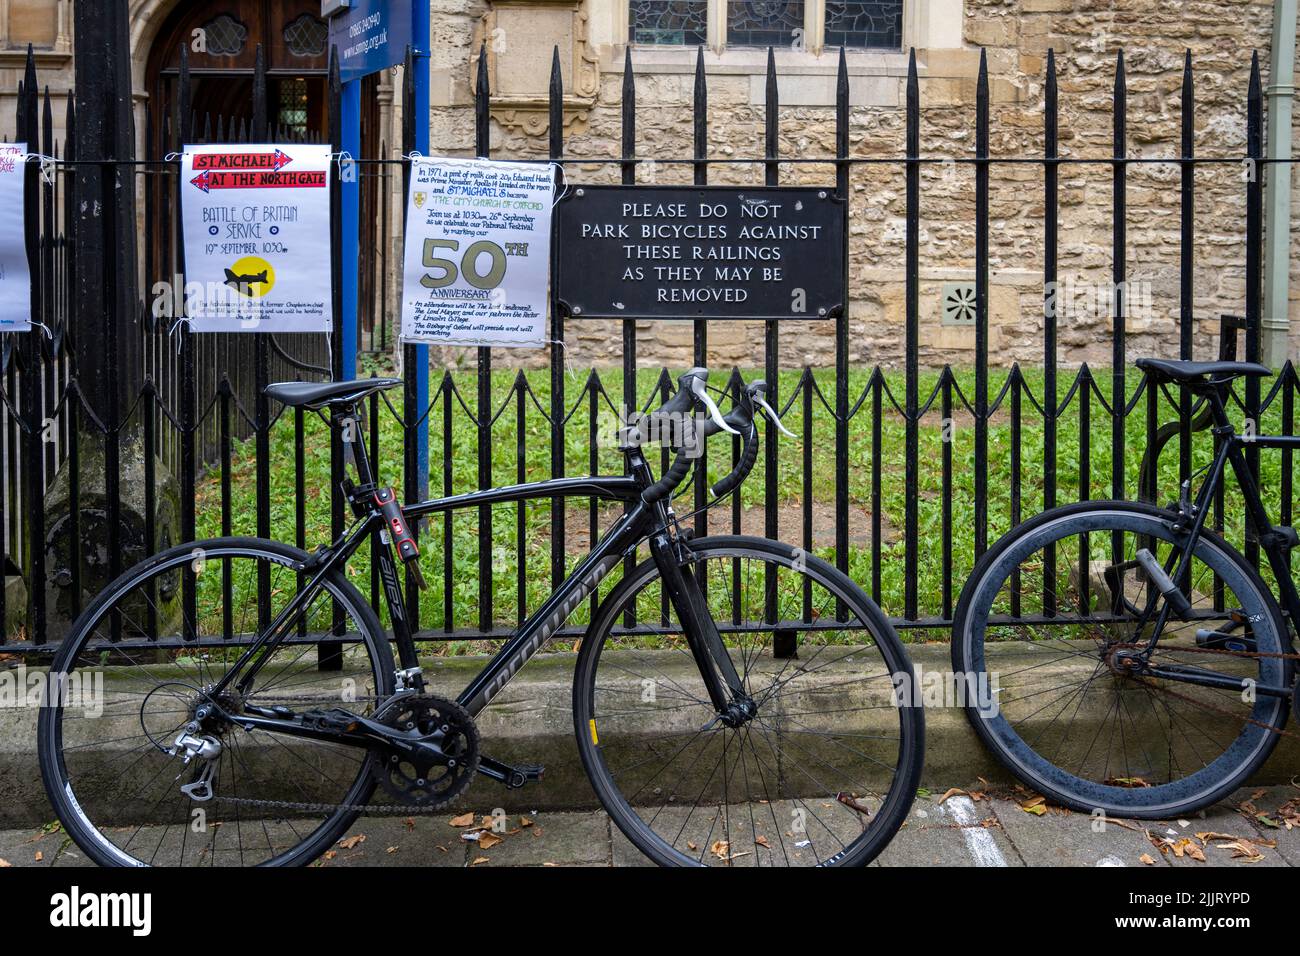 amusing sign being ignored by cyclists. cycle bicycle bike bikes cycles bicycles chained to fence fencing Oxford England Stock Photo